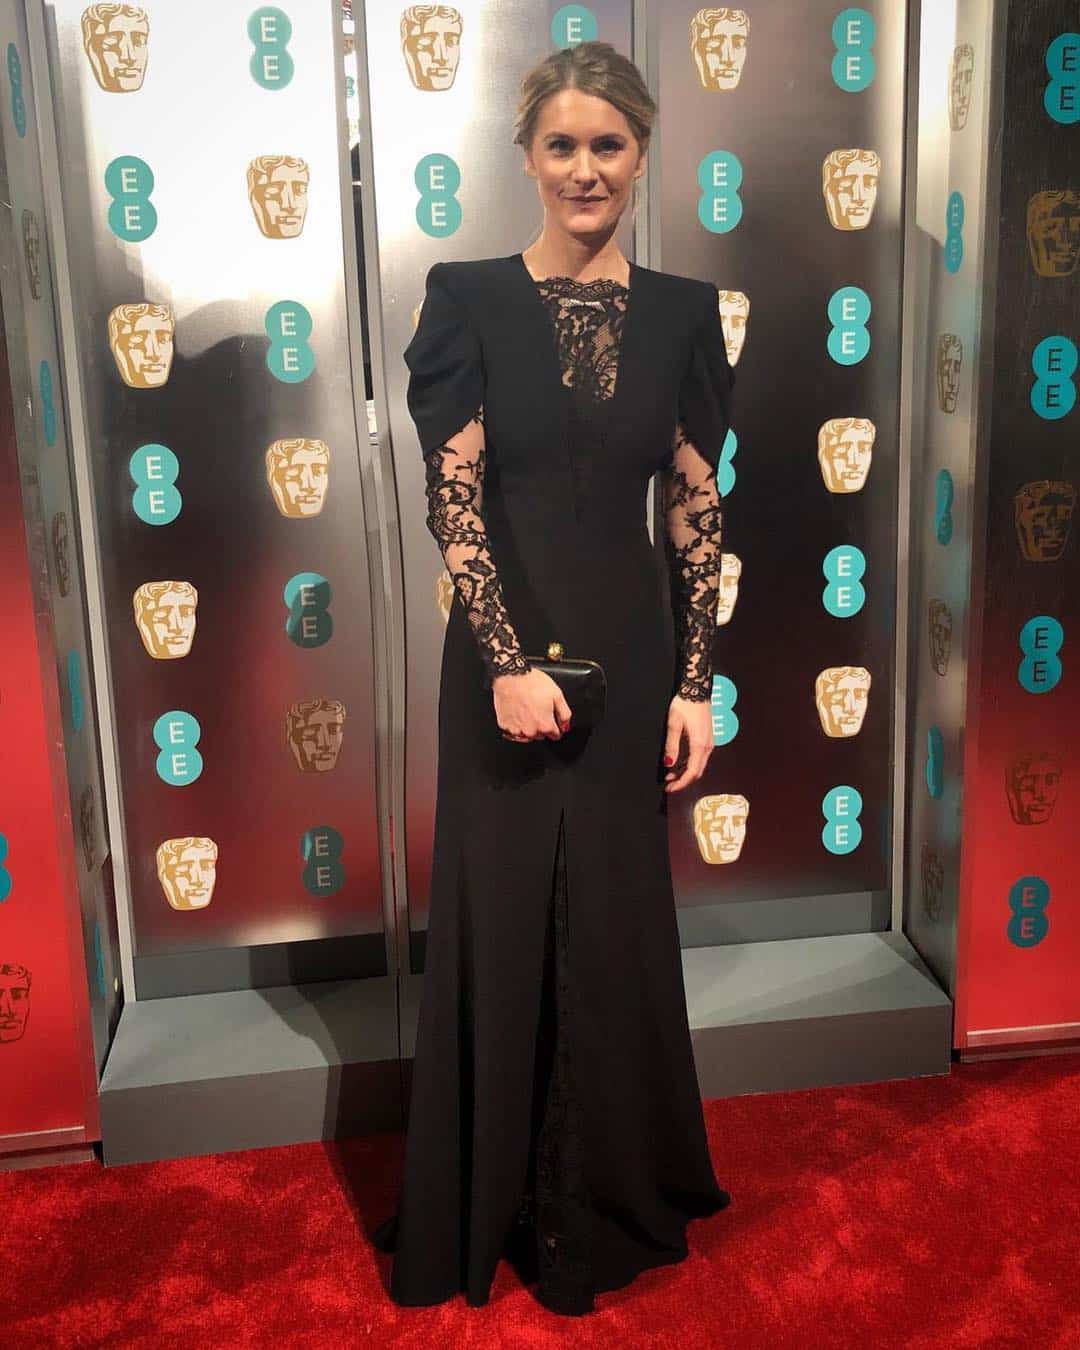 @kinvarabalfour executive producer of at the EE BAFTAs wearing @alexandermcqueen / and also at The Charles Finch & CHANEL Pre-BAFTA Dinner wearing @chanelofficial  @bafta